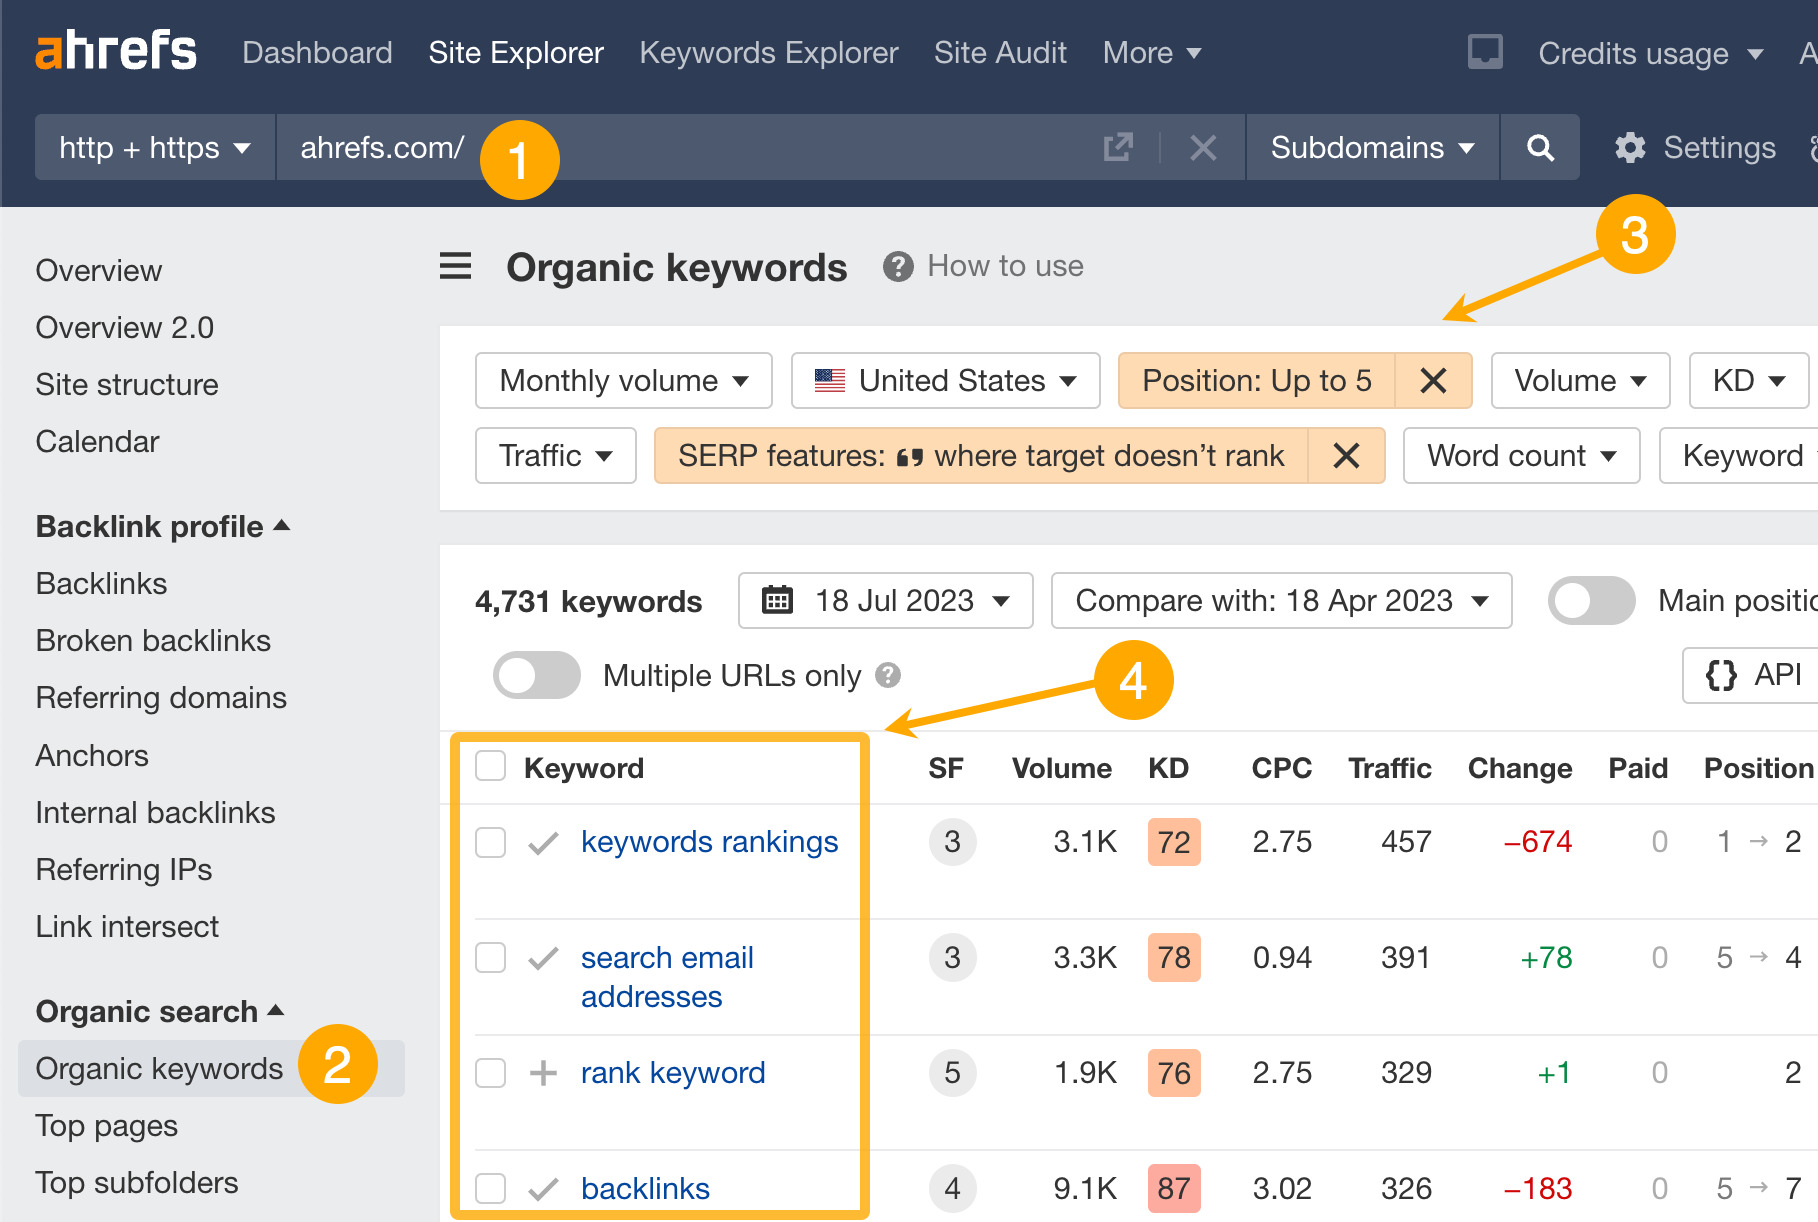 Finding keywords with featured snippets in Ahrefs' Site Explorer